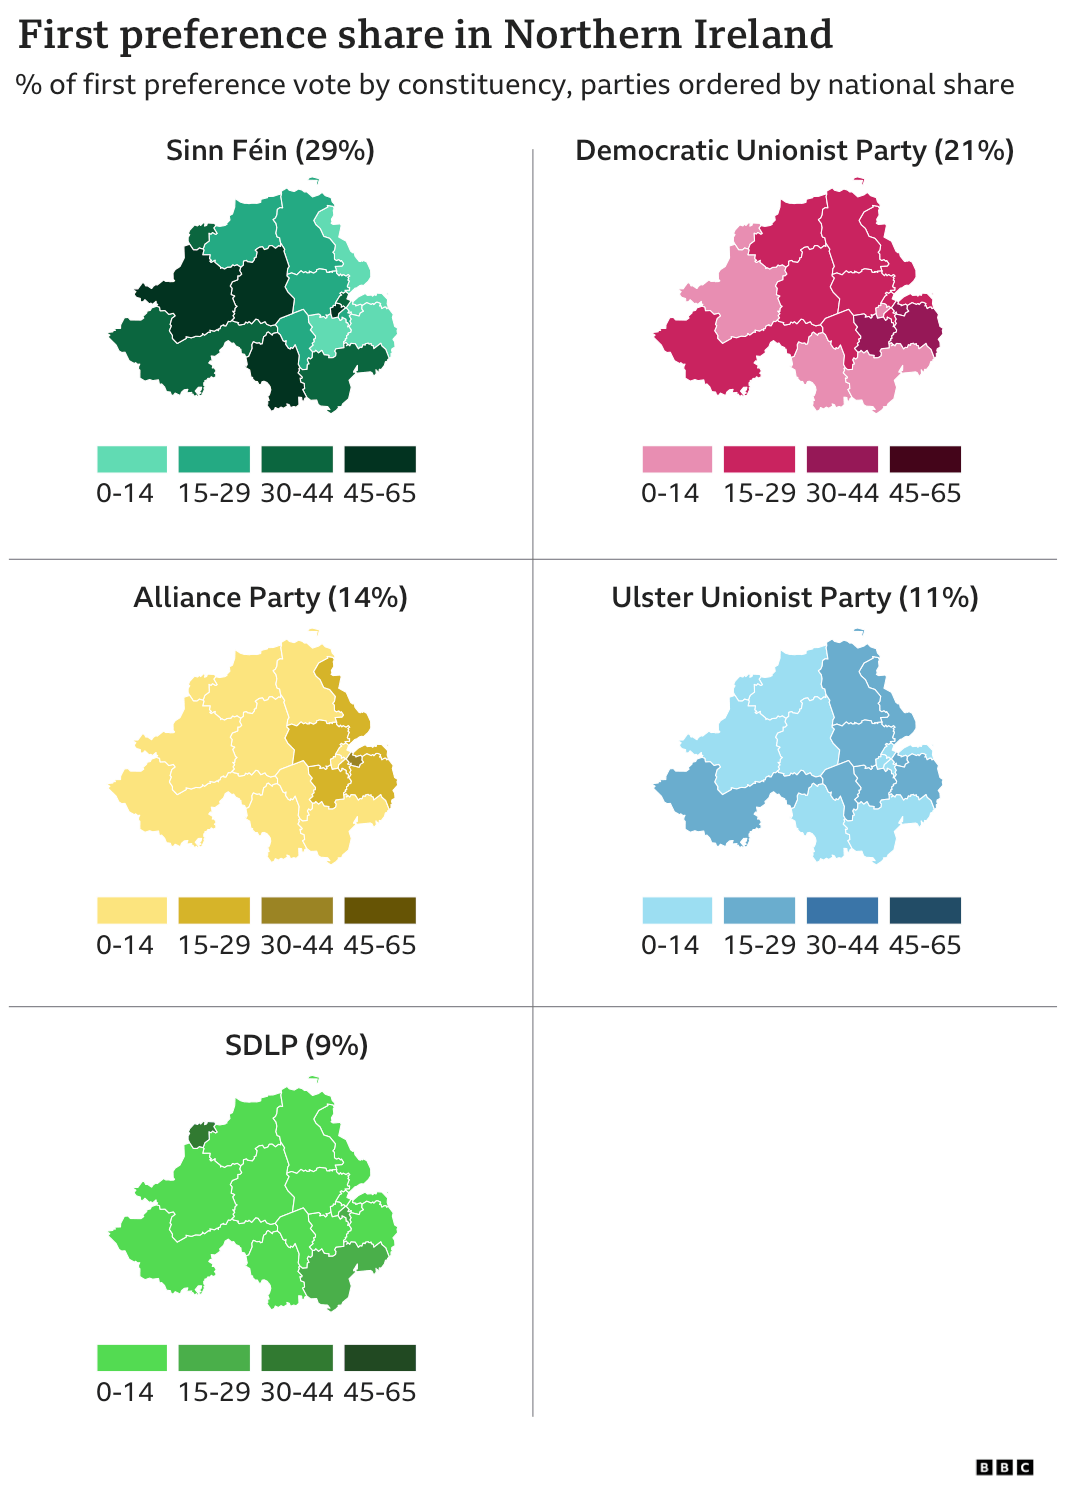 Maps showing first preference share of the vote by party in Northern Ireland. Sinn Fein 29%, DUP 21% Alliance Party 14%, Ulster Unionist Party 11%, SDLP 9%